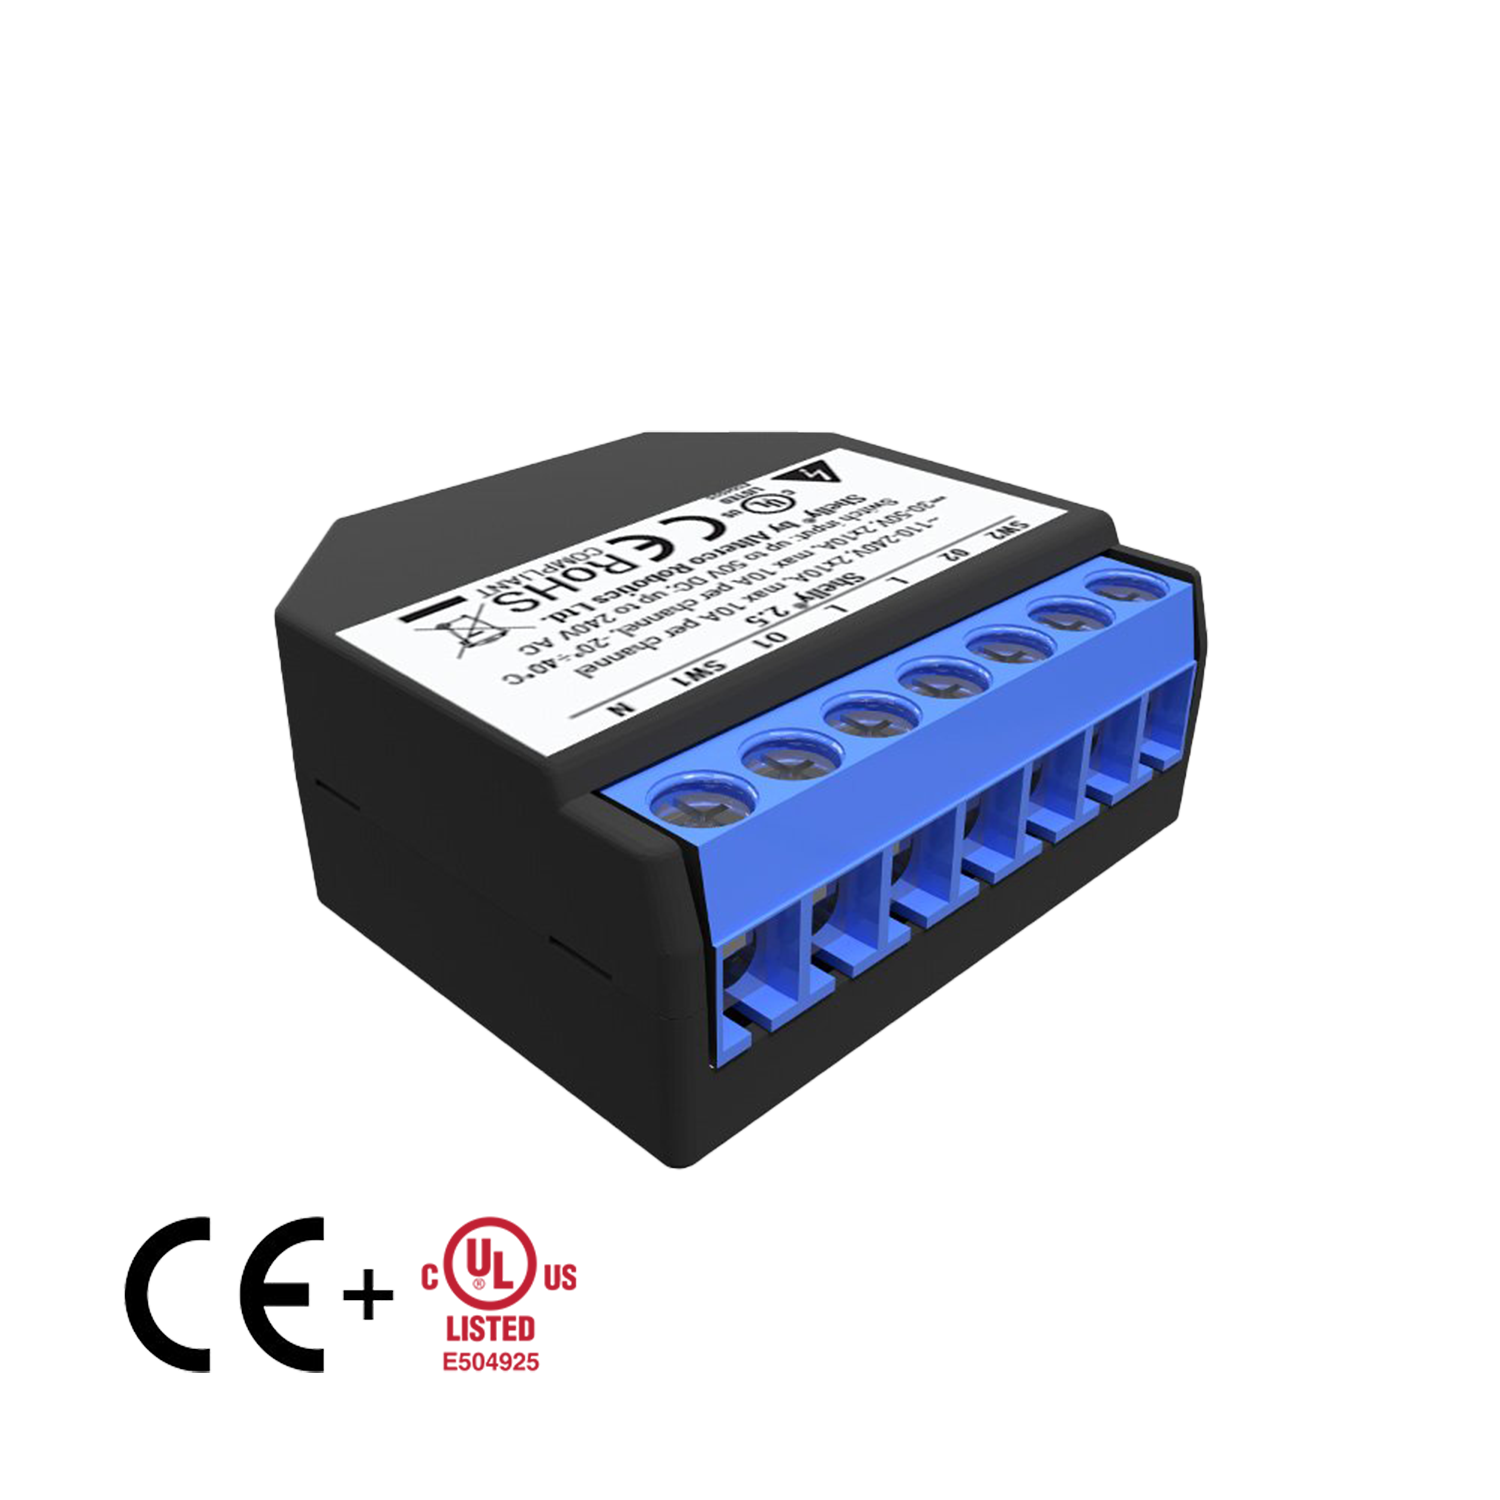 Shelly 2.5 - WiFi-operated Double Relay Switch & Roller Shutter